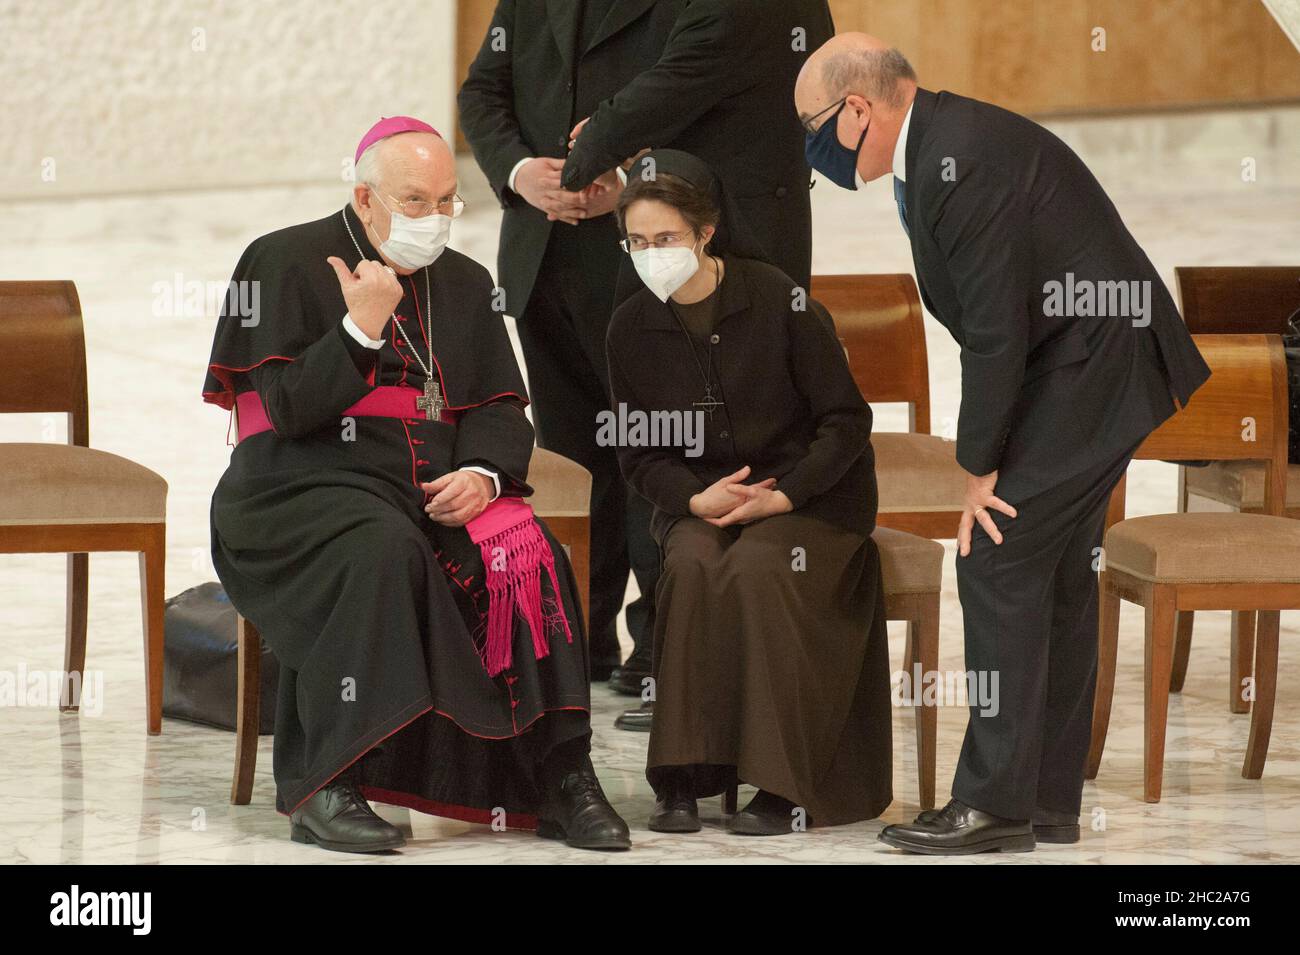 Rome, Italy. 23rd Dec, 2021. Italy, Rome, Vatican, 21/12/23. from left: Msgr. Fernando Vergez Alzaga, Sister Raffaella Petrini and Giuseppe Puglisi, speaks during the audience with Vatican's employees in the Paul VI Hall.Photo by Massimiliano MIGLIORATO/Catholic Press Photo Credit: Independent Photo Agency/Alamy Live News Stock Photo